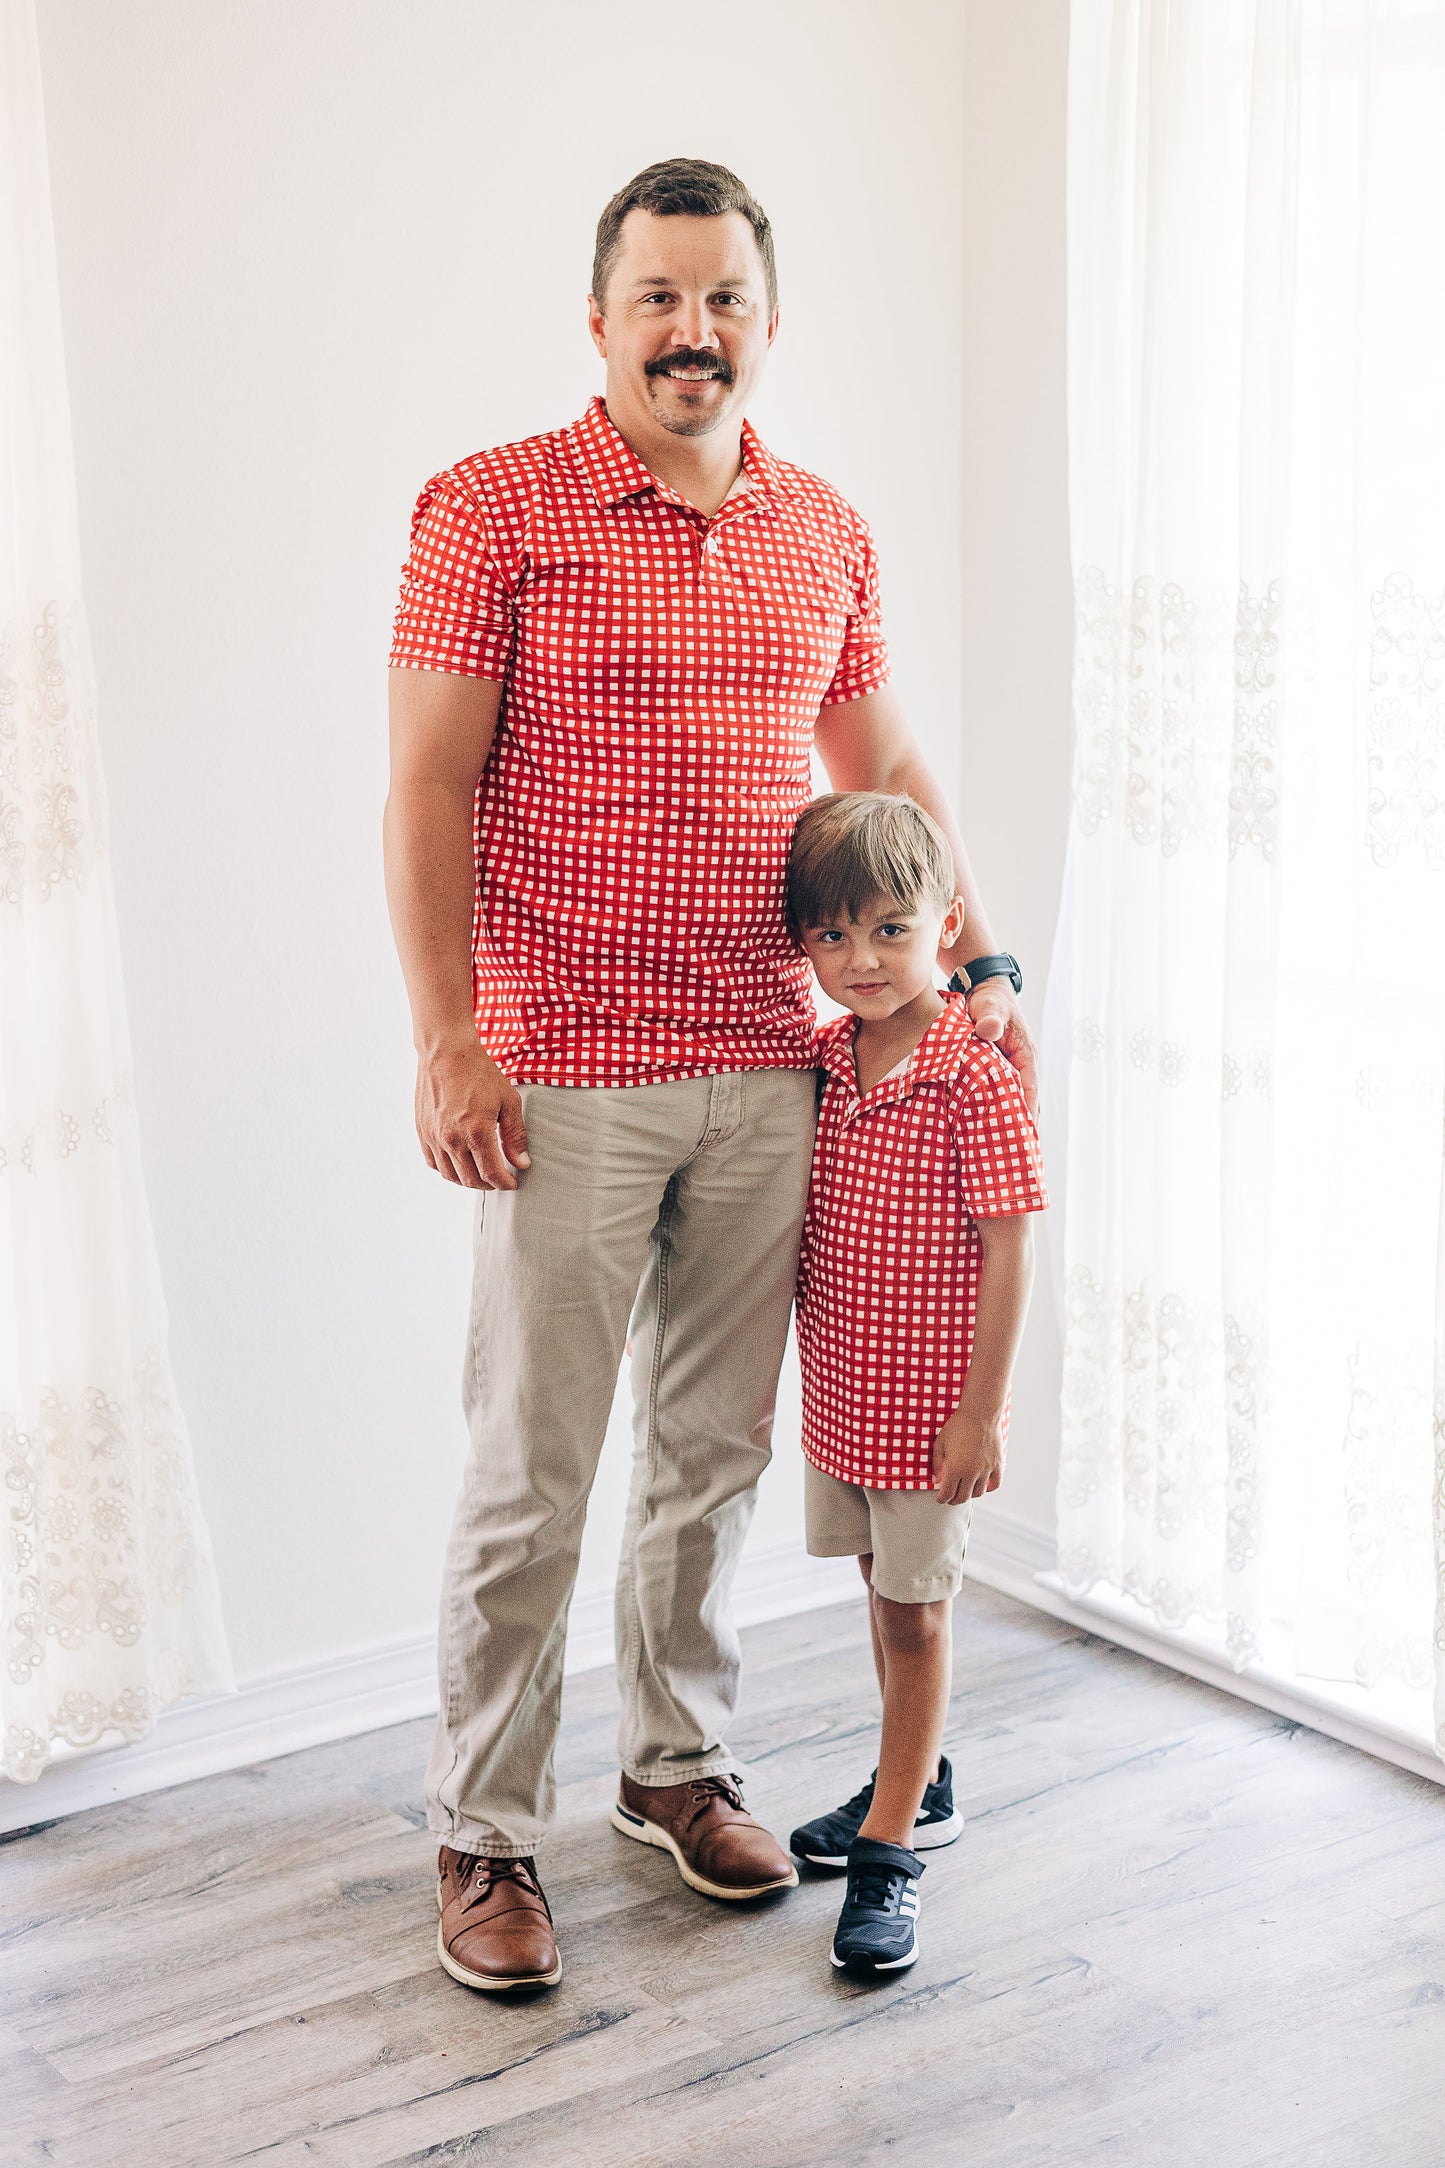 Polo - Red Gingham